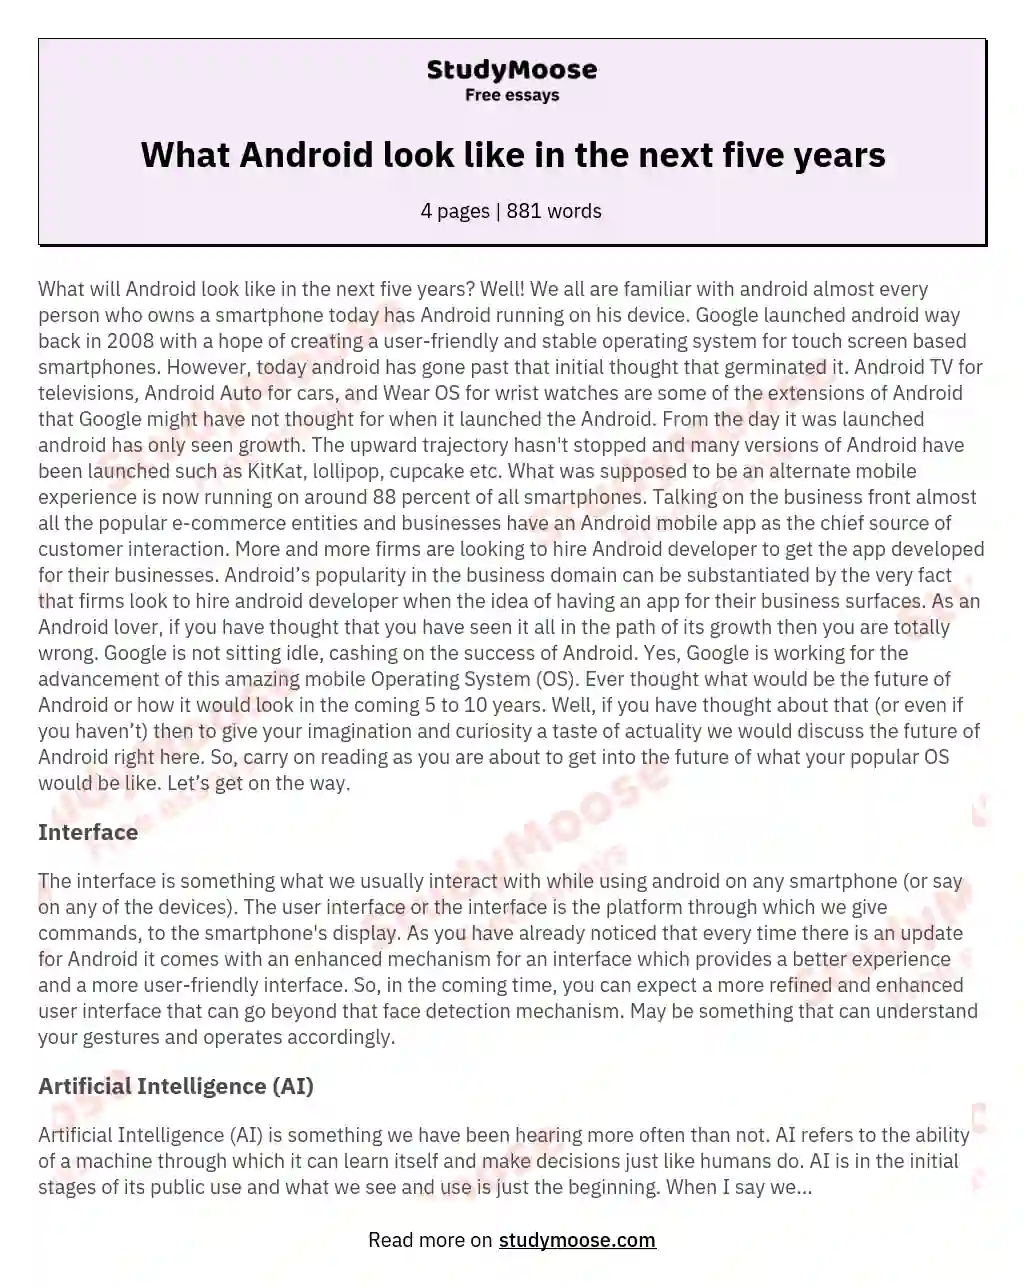 What Android look like in the next five years essay